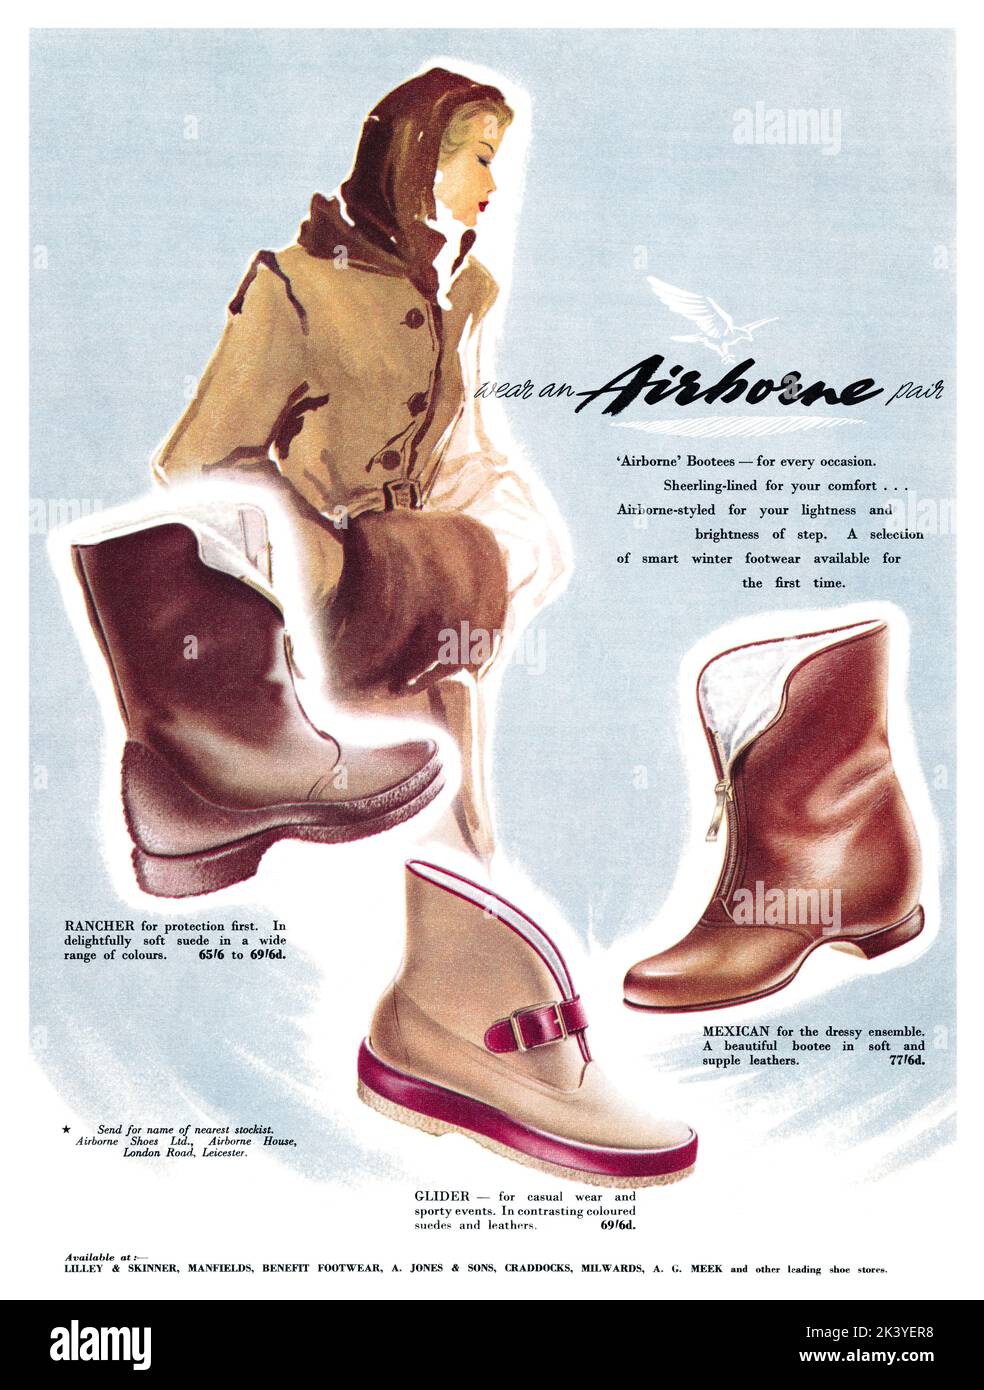 1950 British advertisement for winter bootees by Airborne. Stock Photo